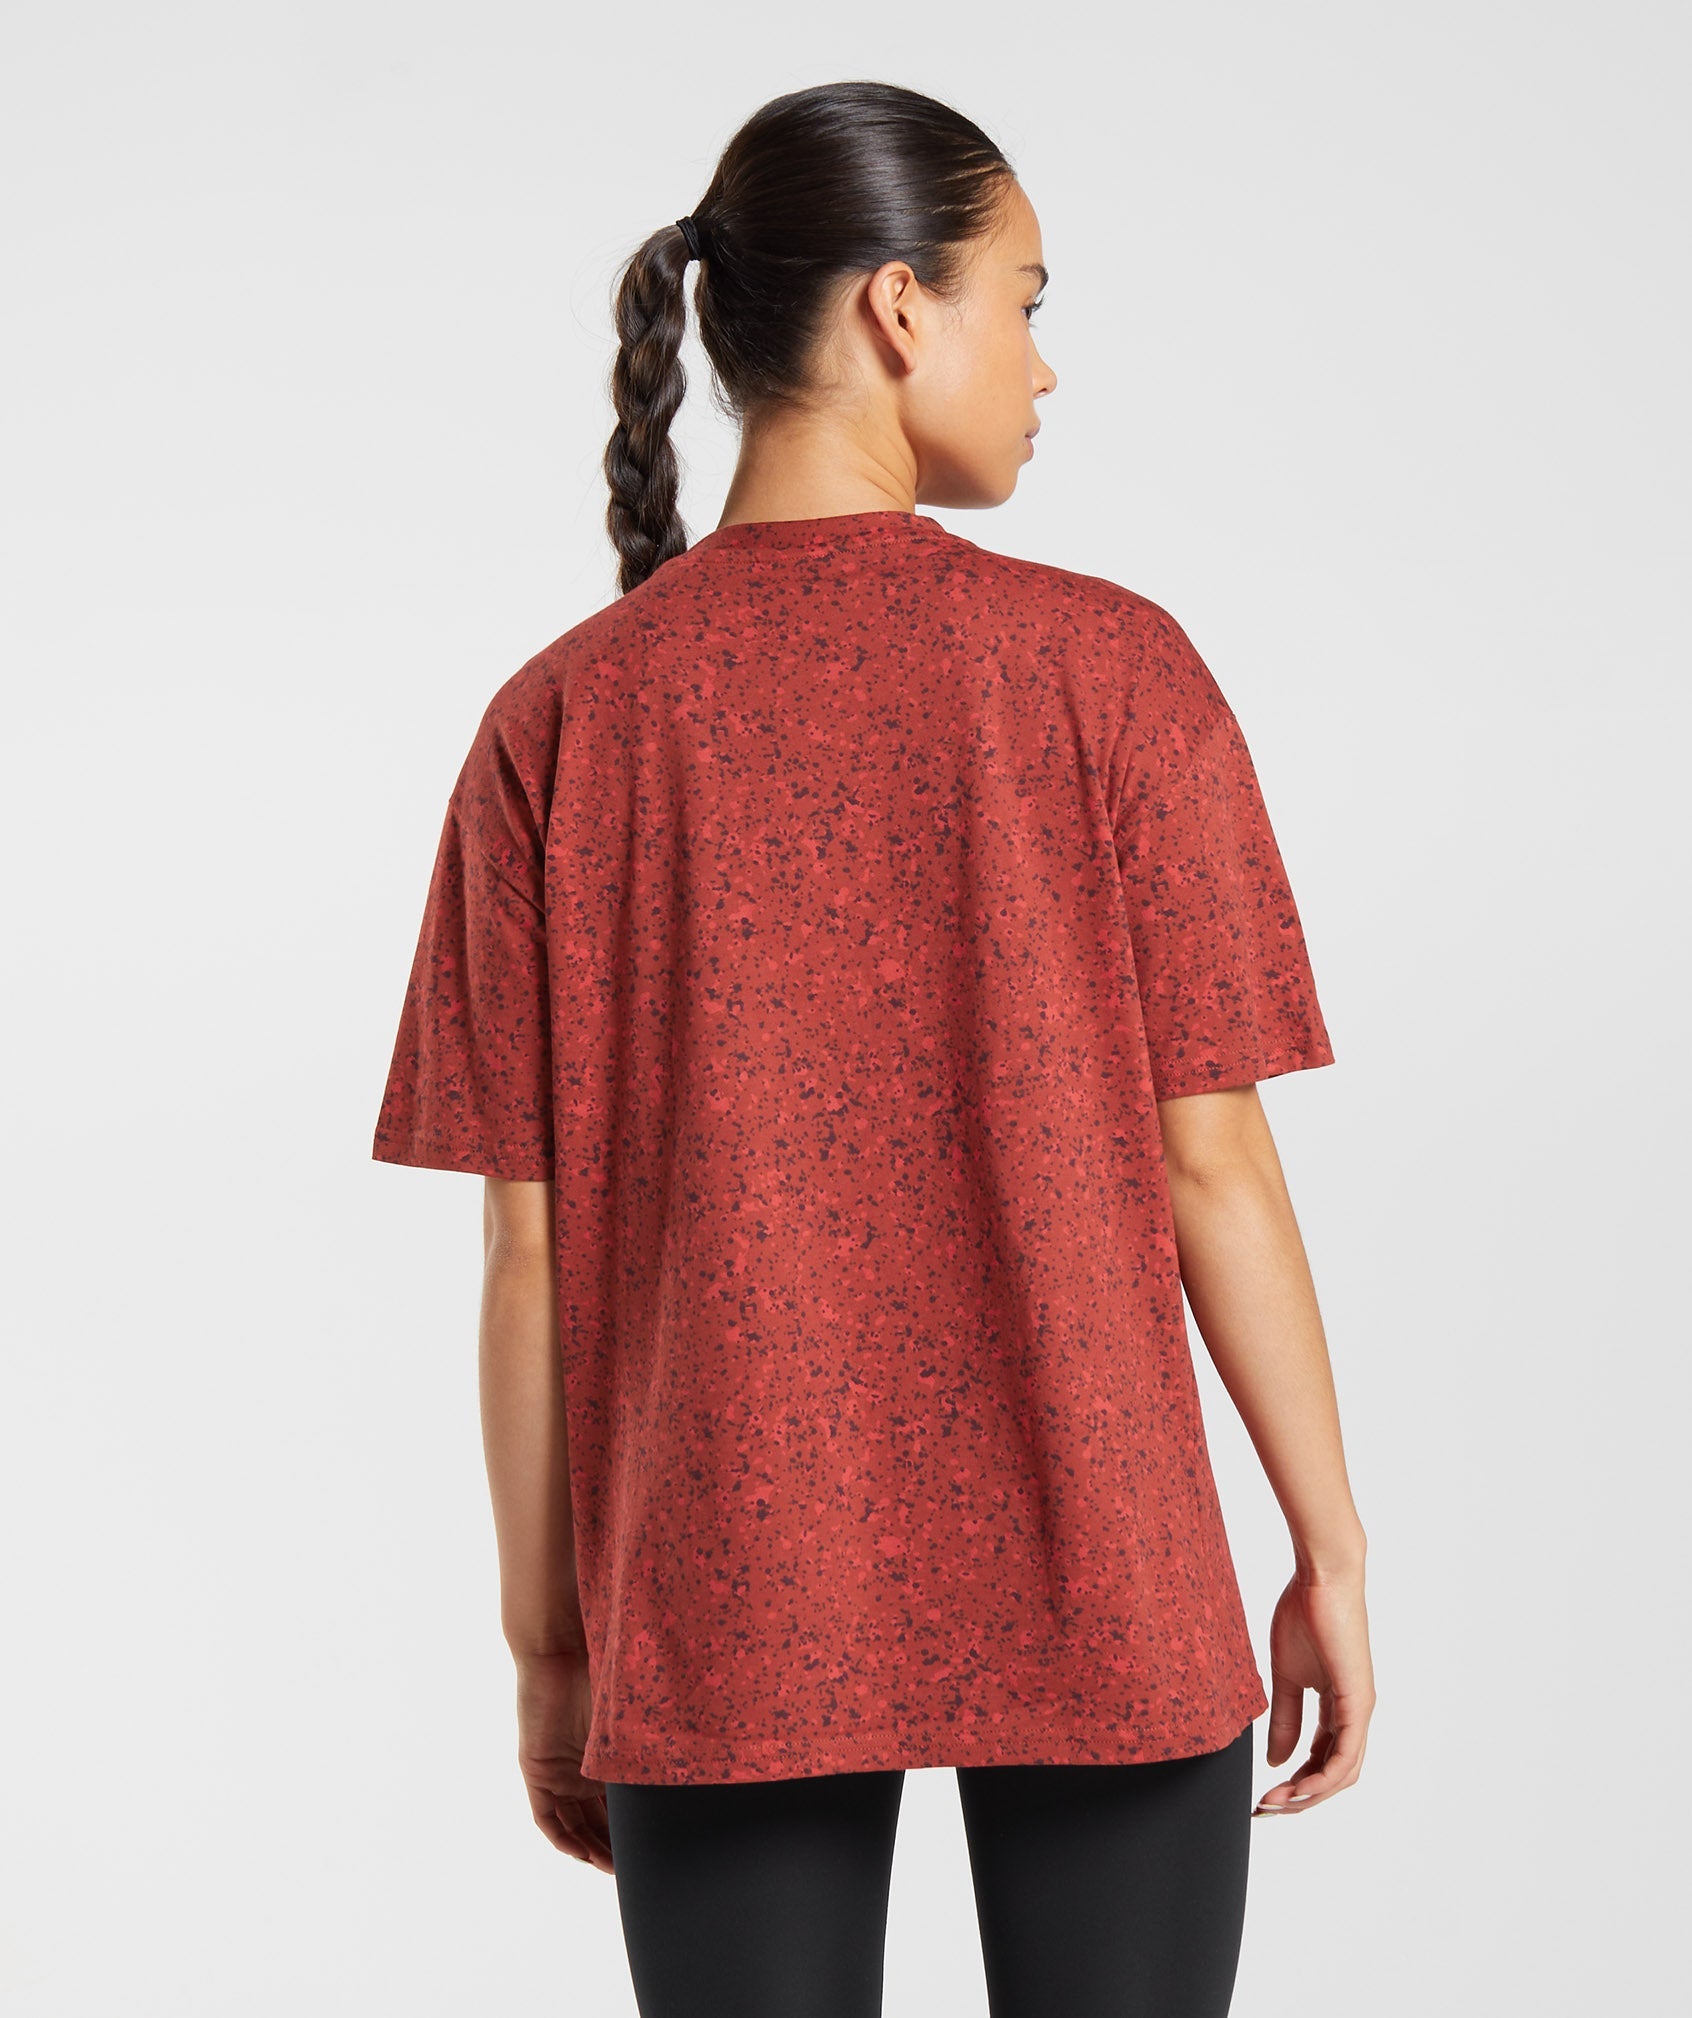 Mineral Print T-Shirt in Rosewood Red - view 2